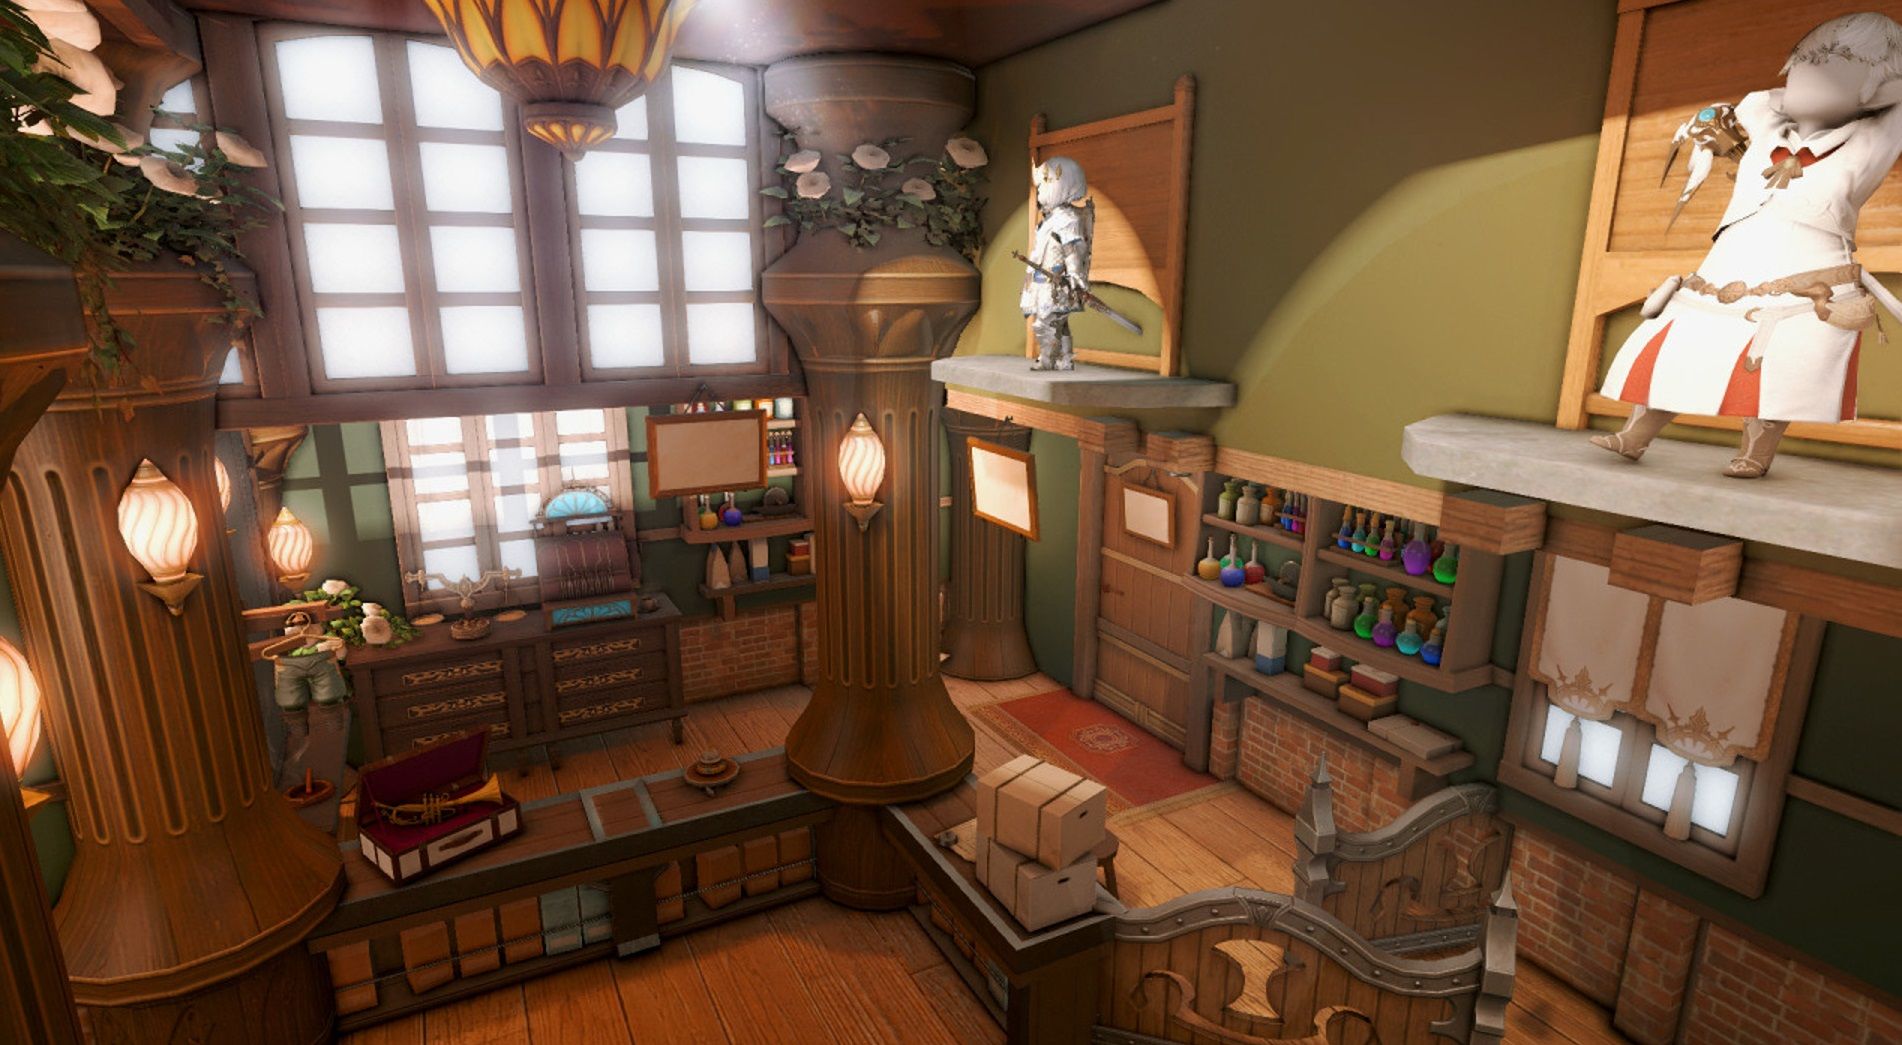 Final Fantasy 14 Decorated Interior of House